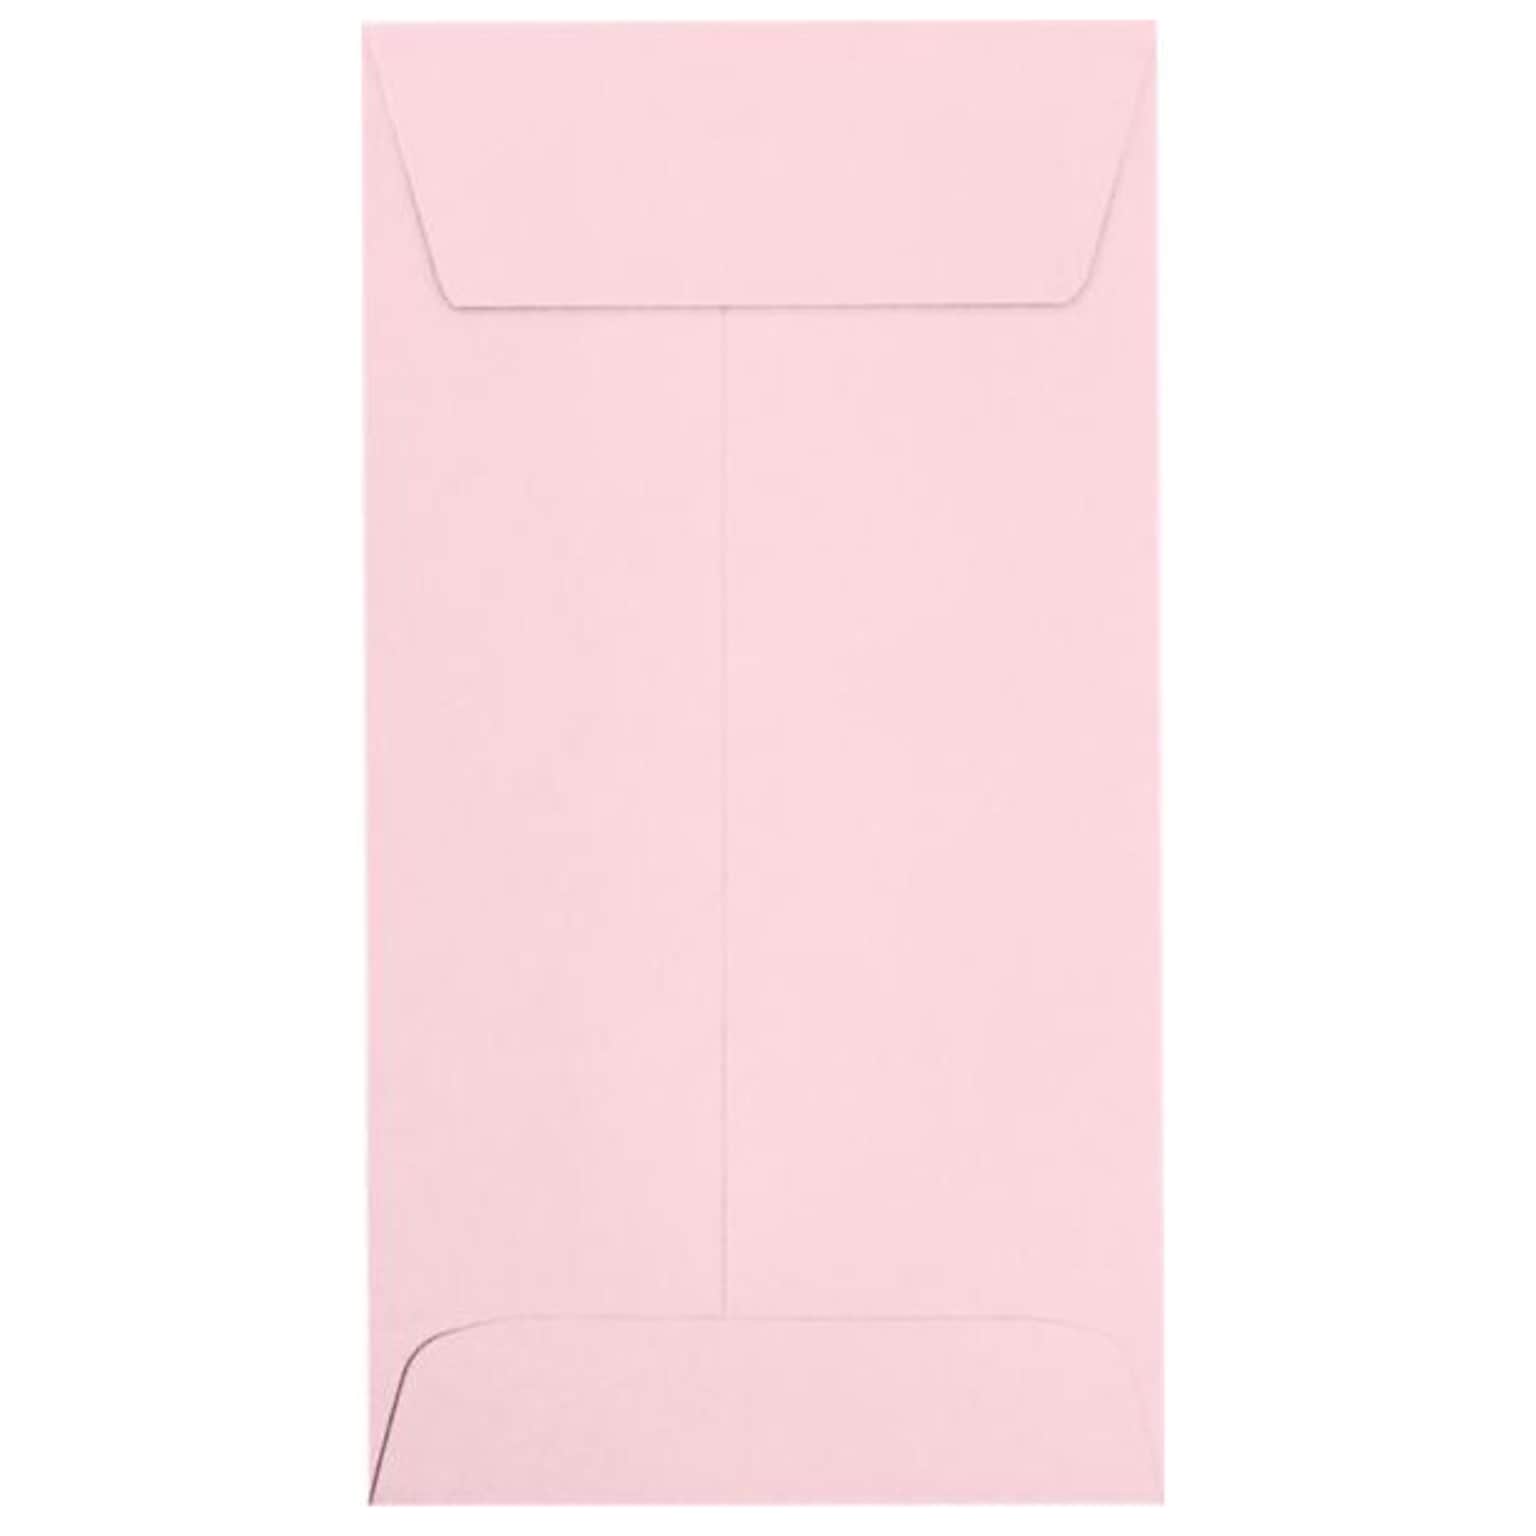 JAM Paper #7 Coin Envelopes, Peel & Press, Candy Pink, 3 1/2 x 6 1/2, 50 Pack (7CO-23-50)